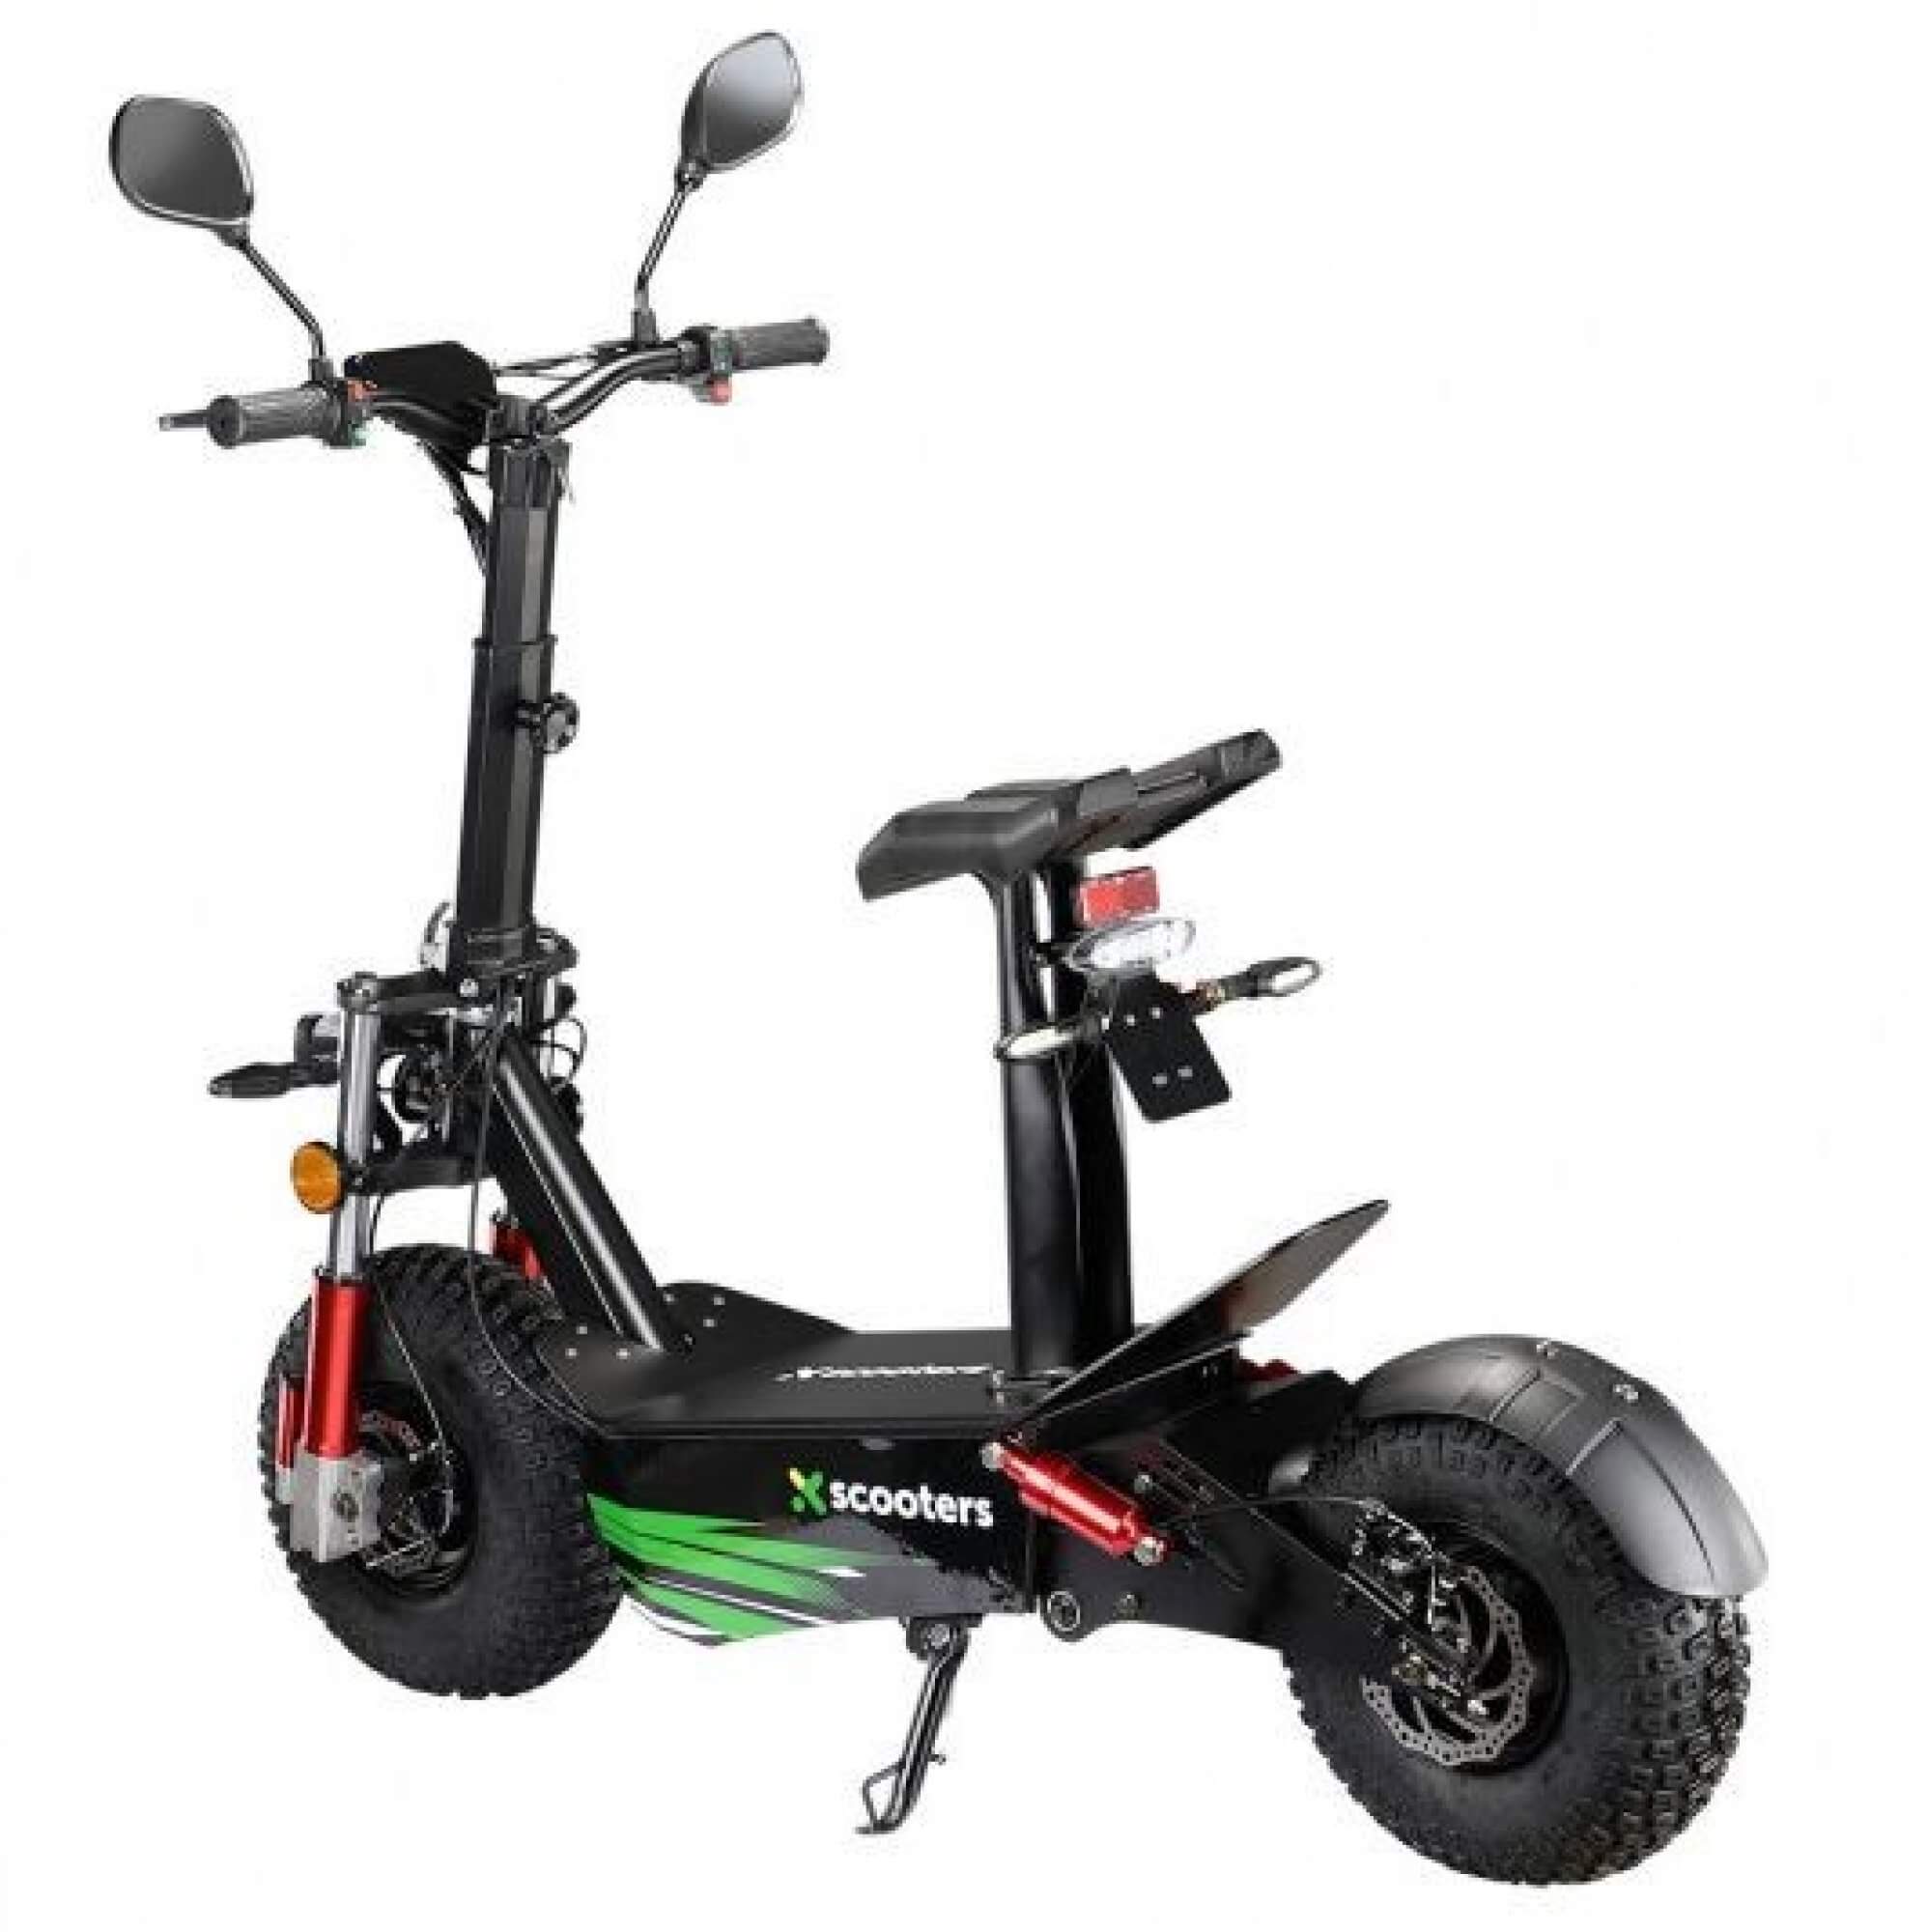 X-scooters XR04 EEC 60 V